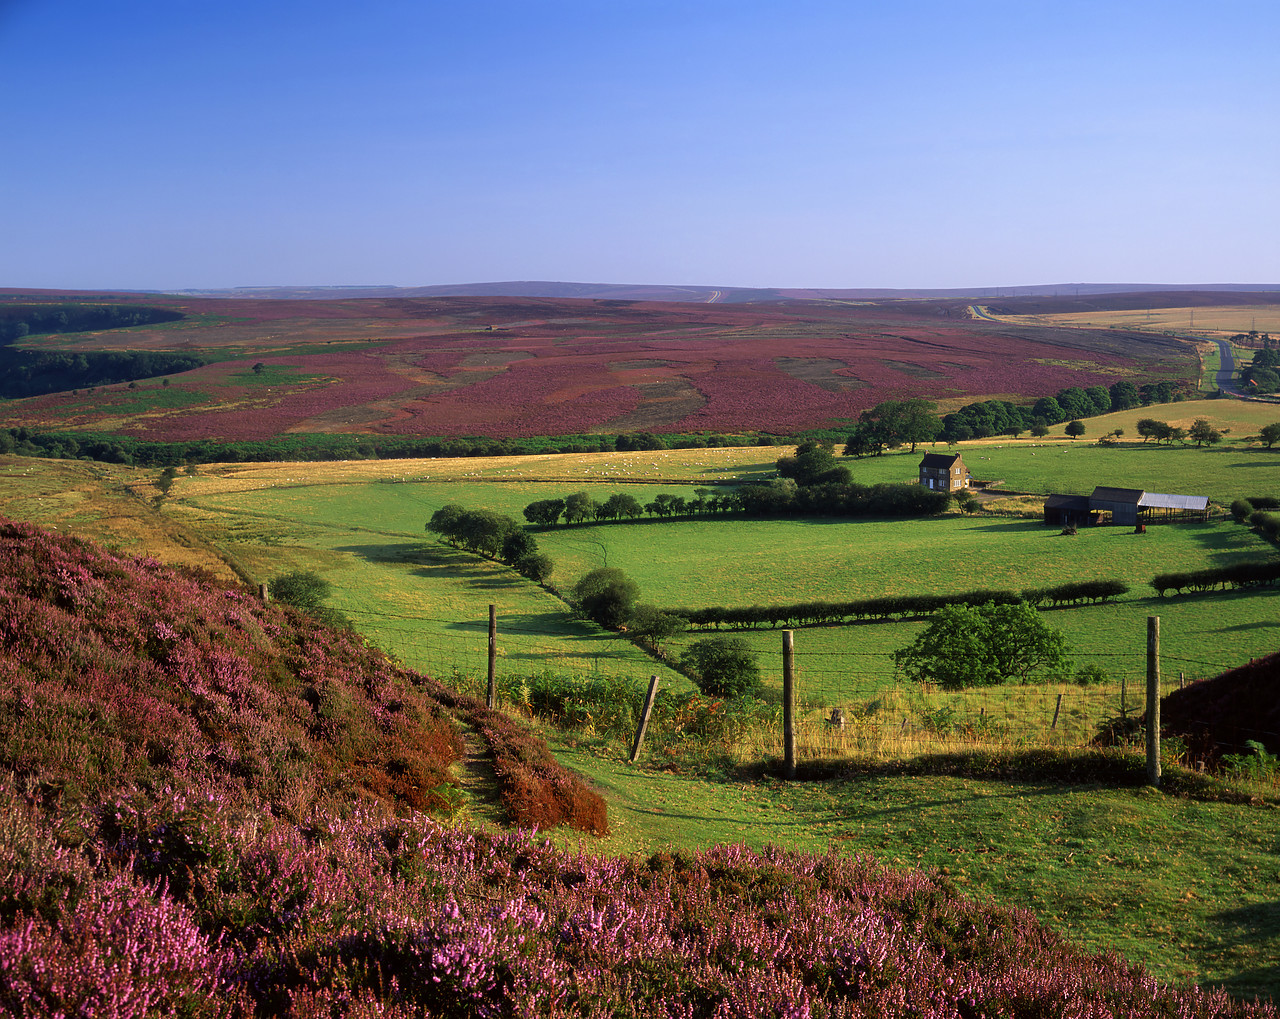 #980980-1 - Cottage on the Moors, North Yorkshire, England